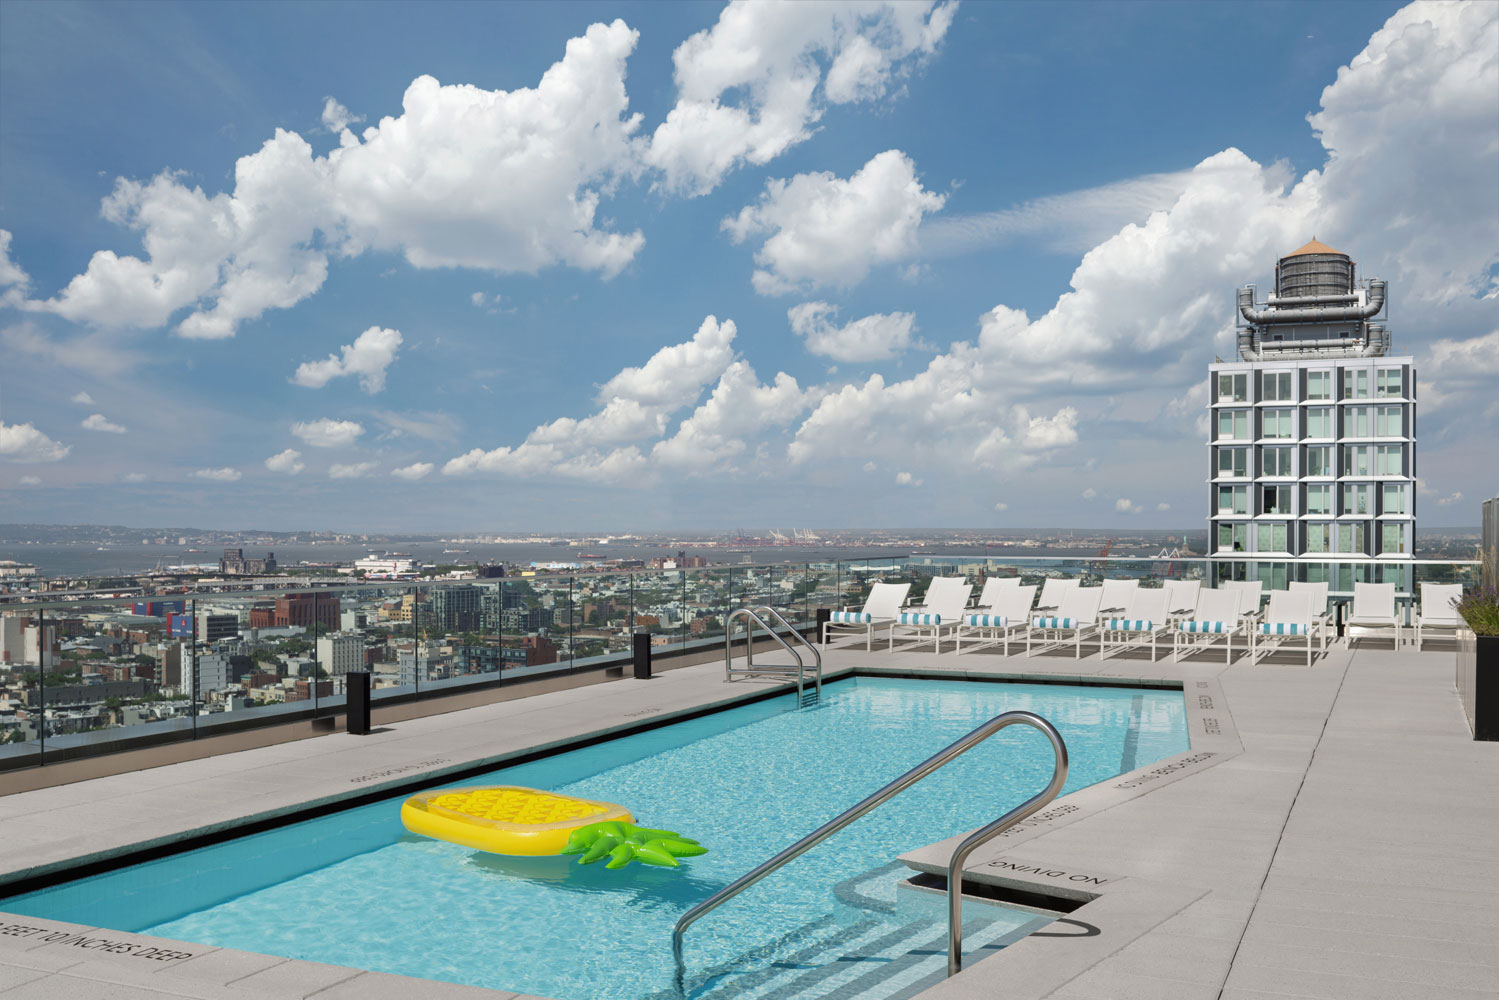 Plank Road rooftop amenity space with swimming pool